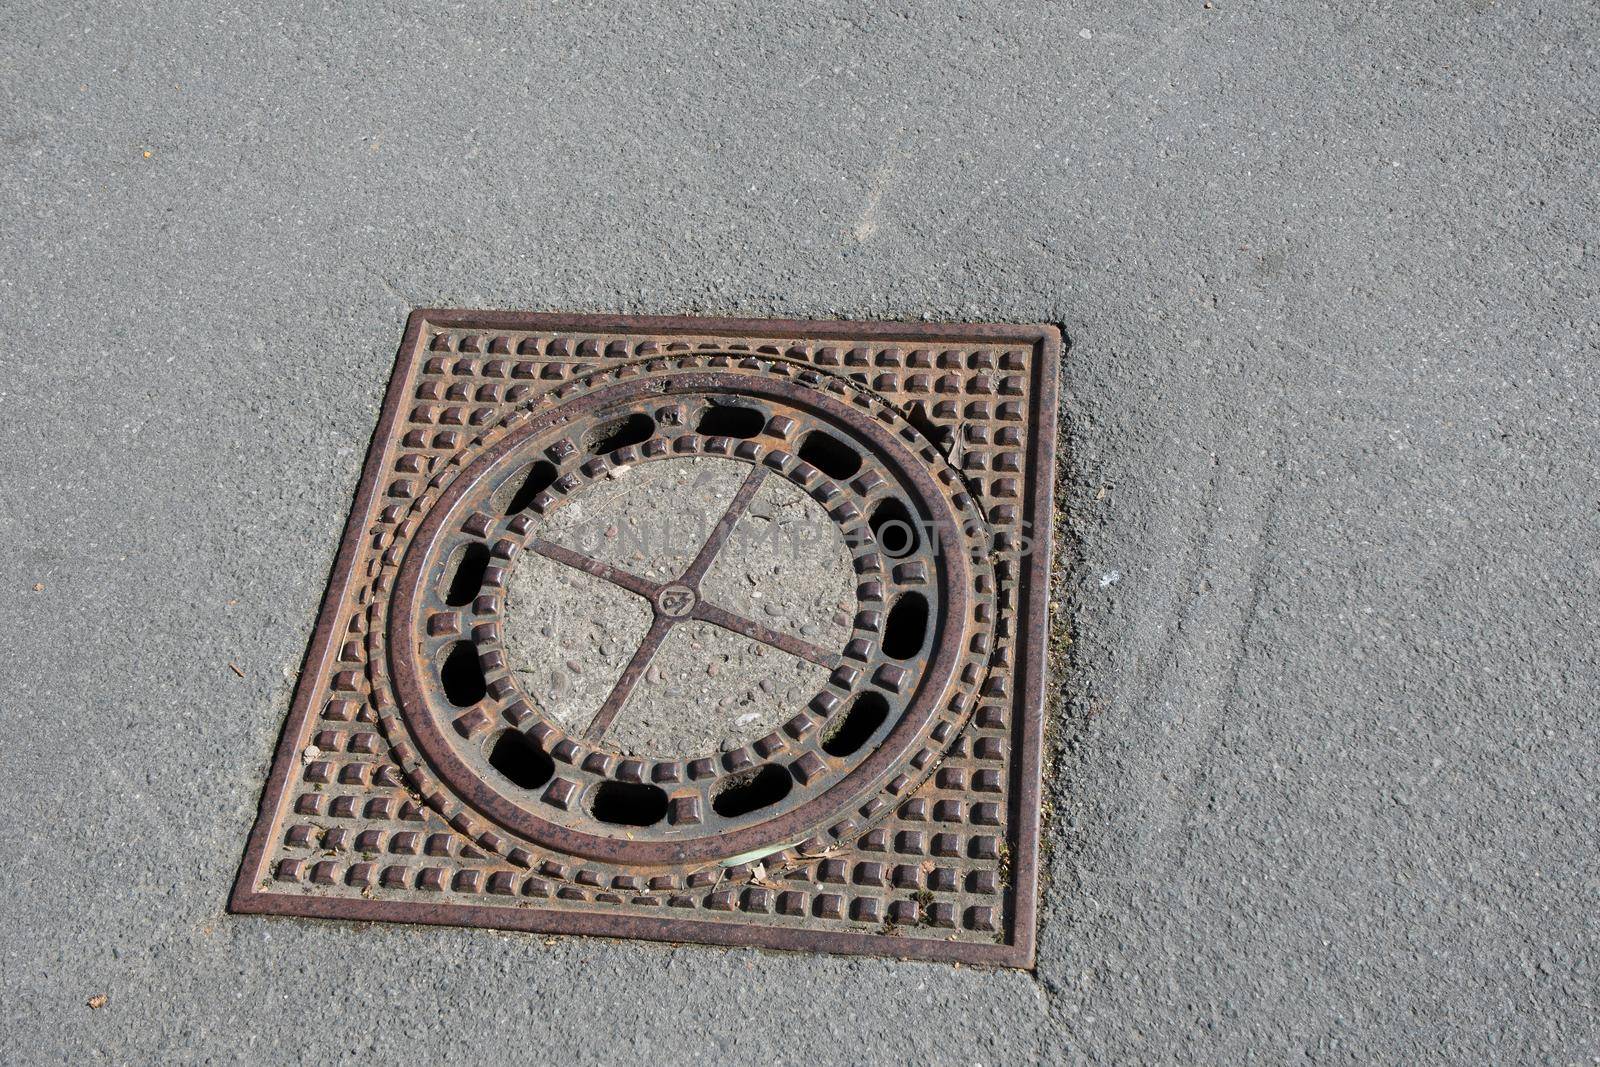 Old iron metal manhole cover sewer cap on the city street asphalt. High quality photo